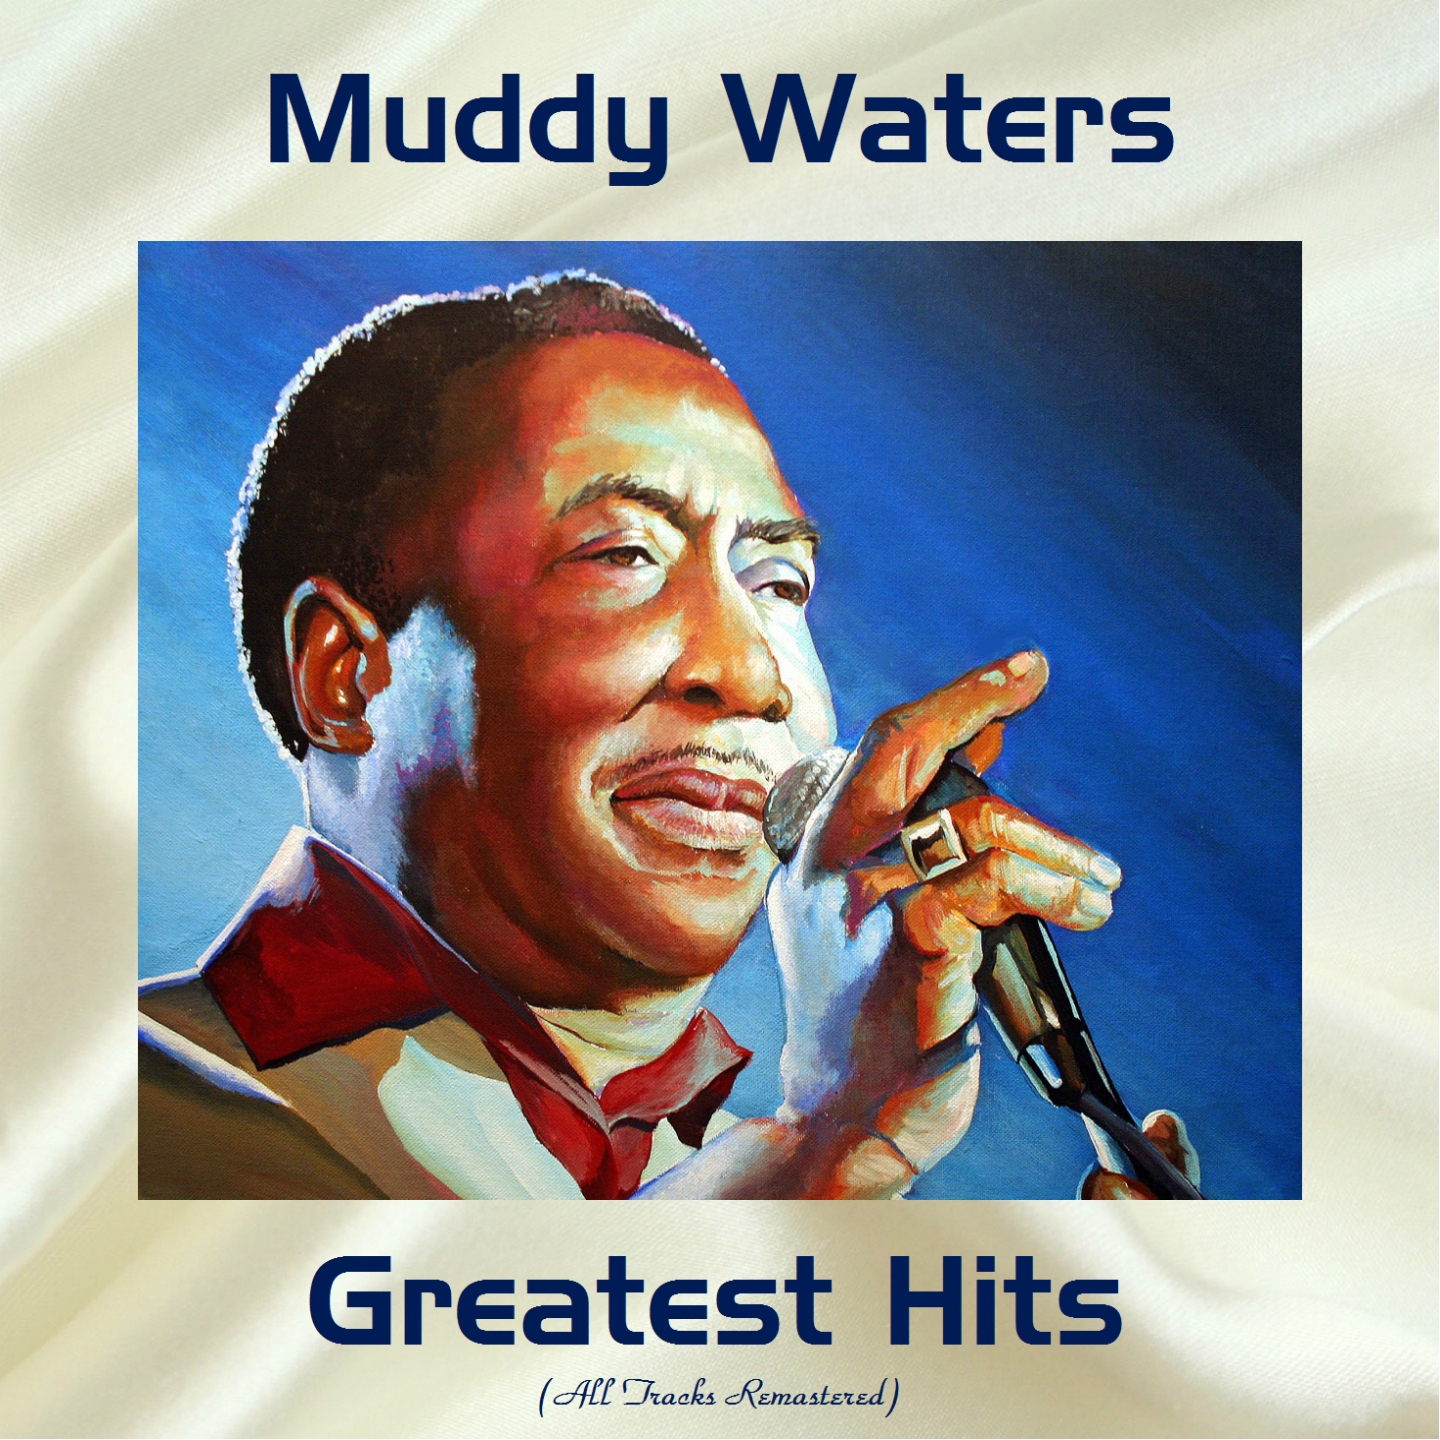 Muddy Waters Greatest Hits (All Tracks Remastered)